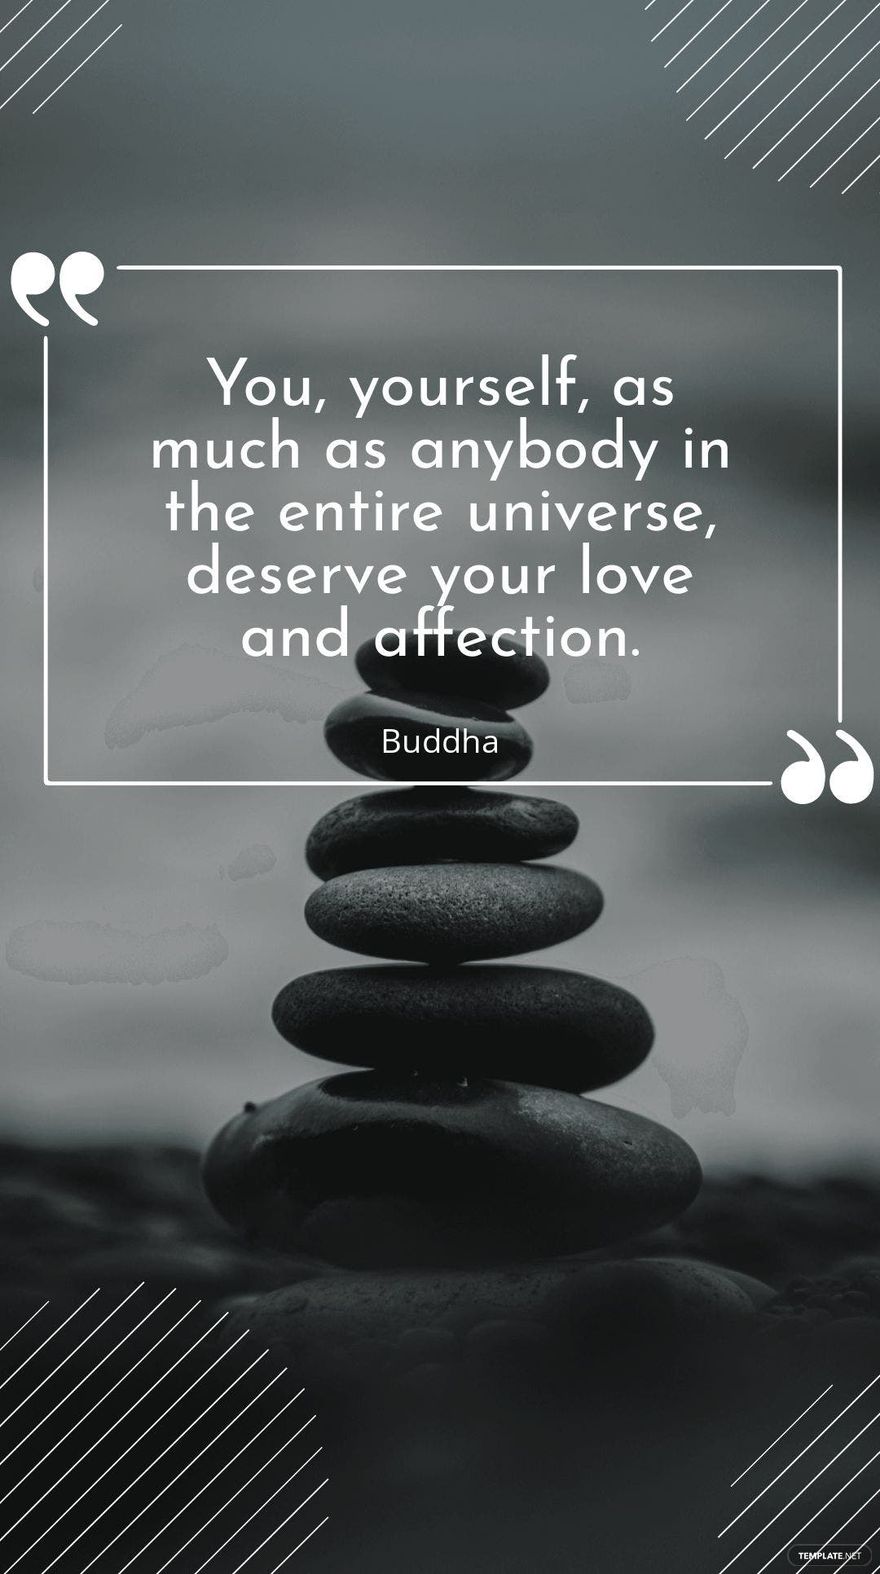 Buddha - “You, yourself, as much as anybody in the entire universe, deserve your love and affection.” in JPG